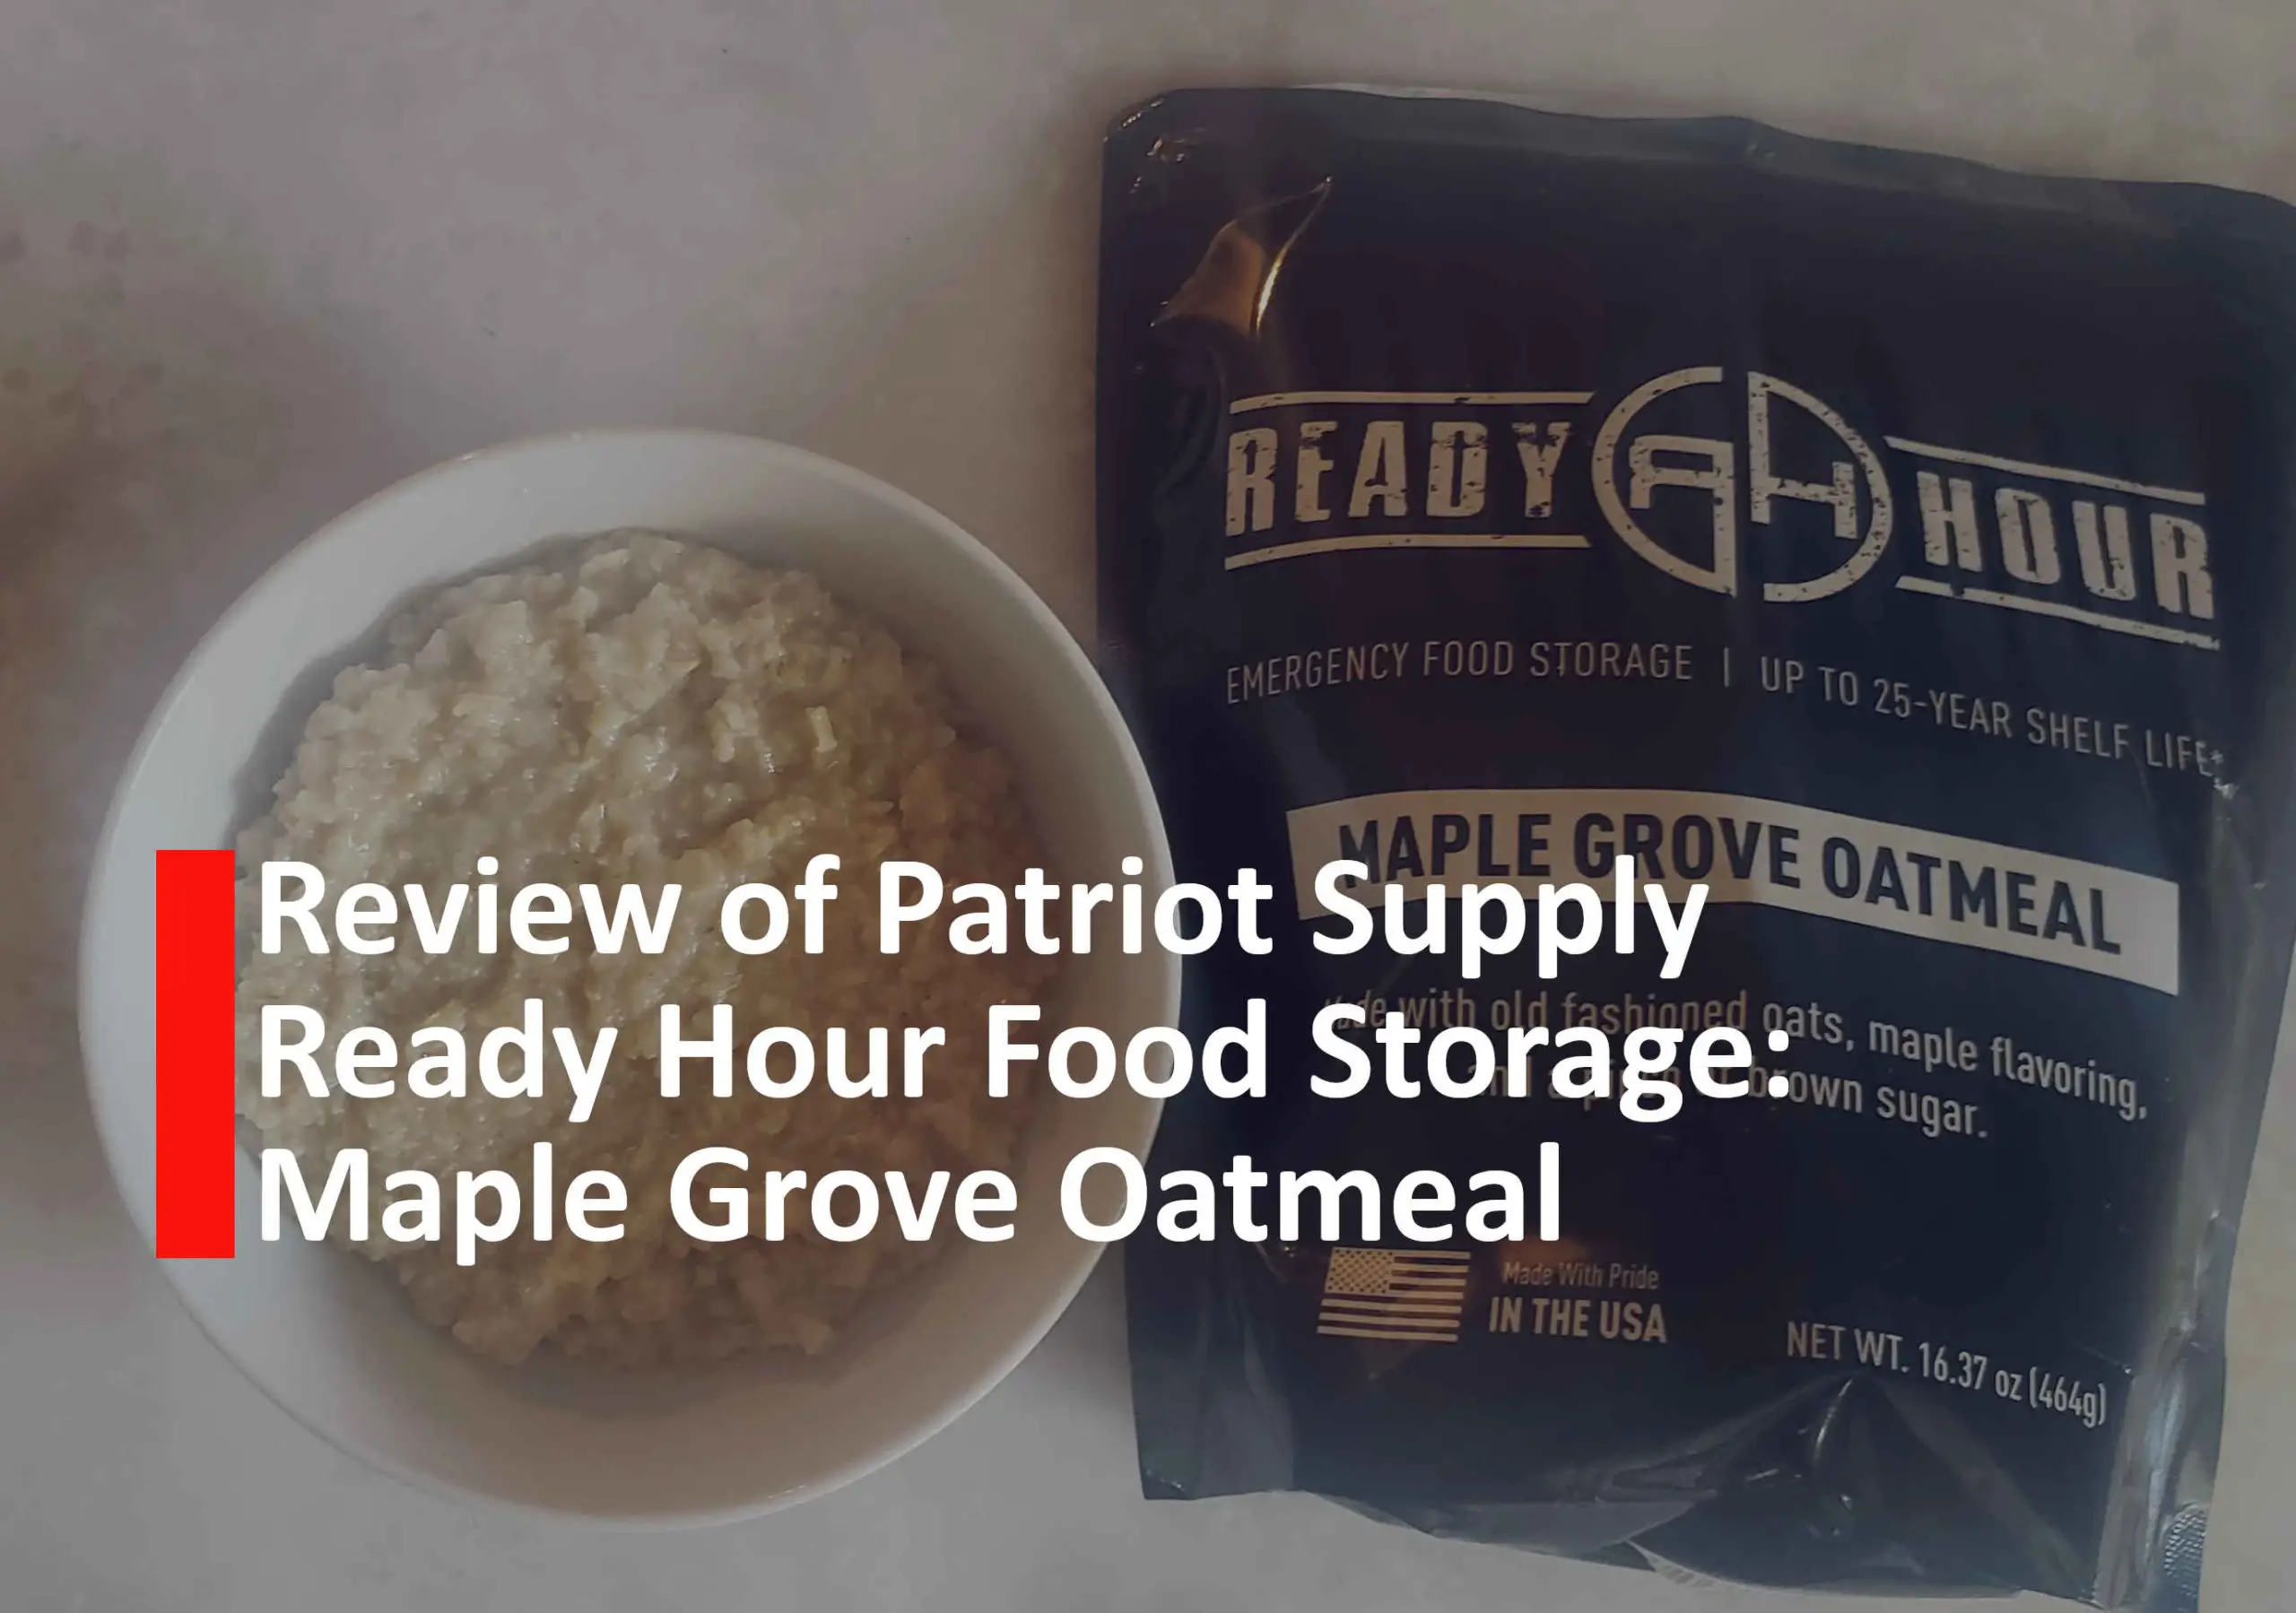 Review of Patriot Supply Ready Hour Food Storage: Maple Grove Oatmeal